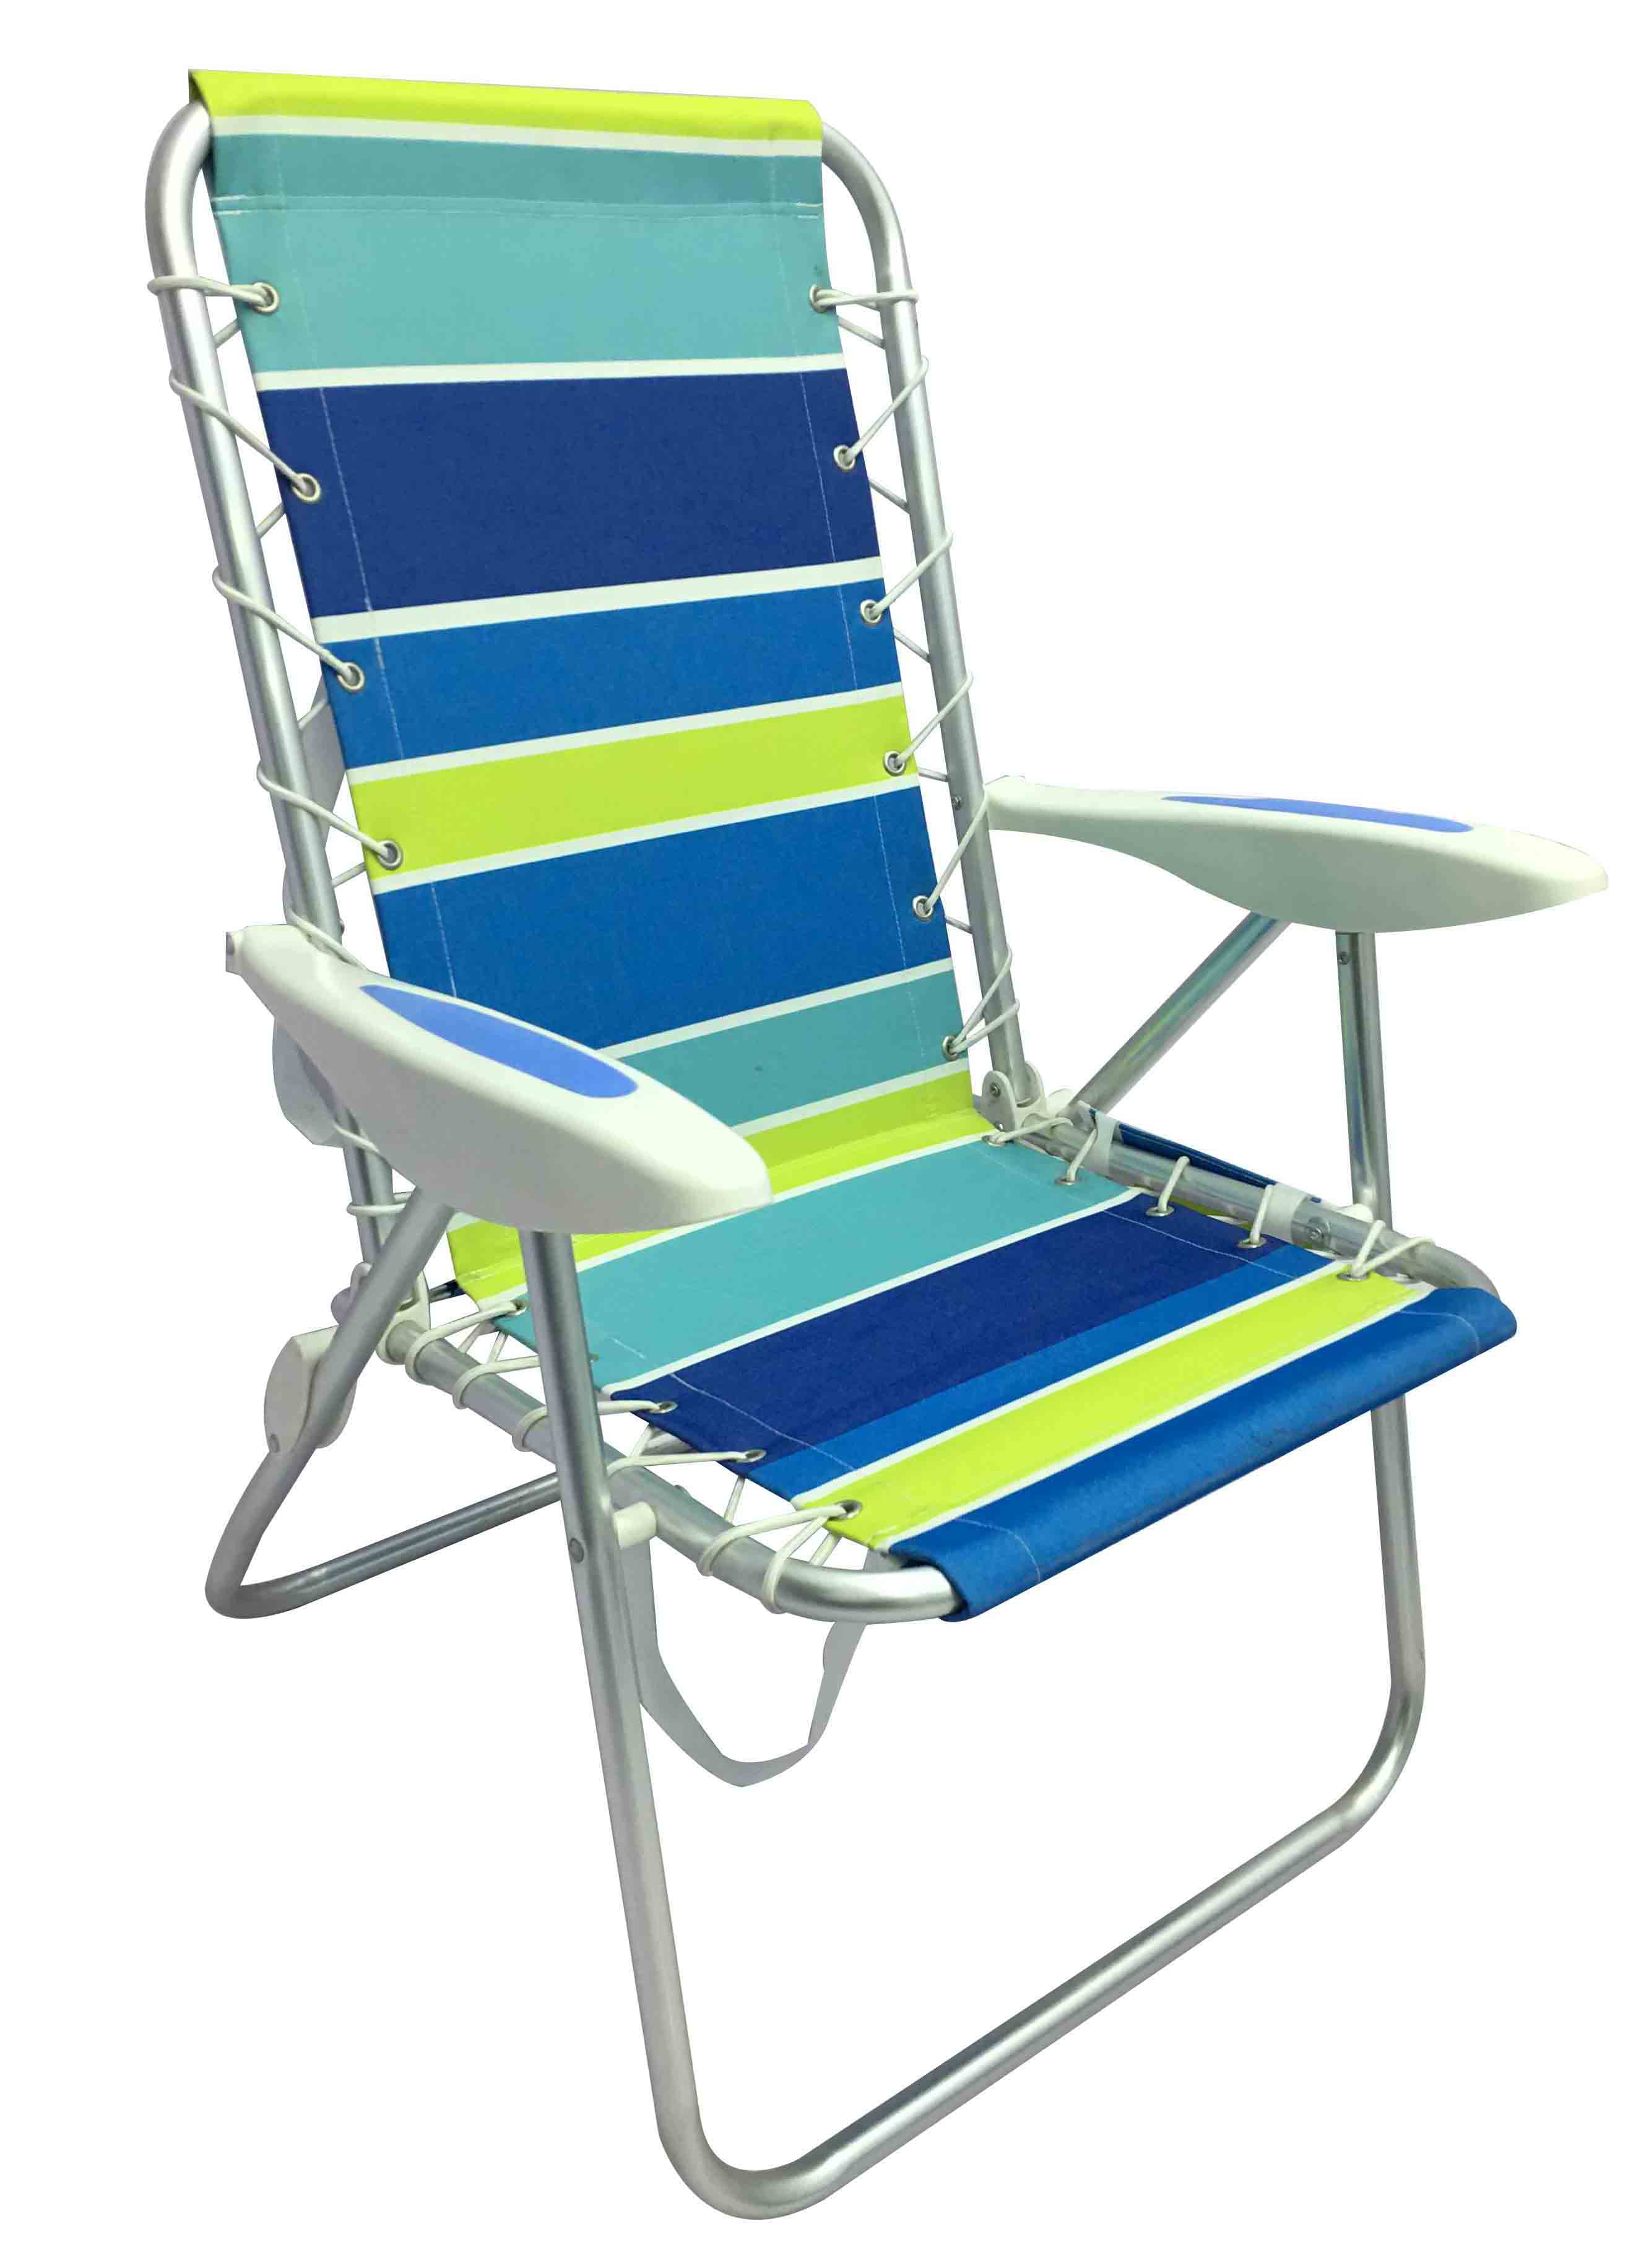 Minimalist Mainstays Pvc Beach Chair for Large Space